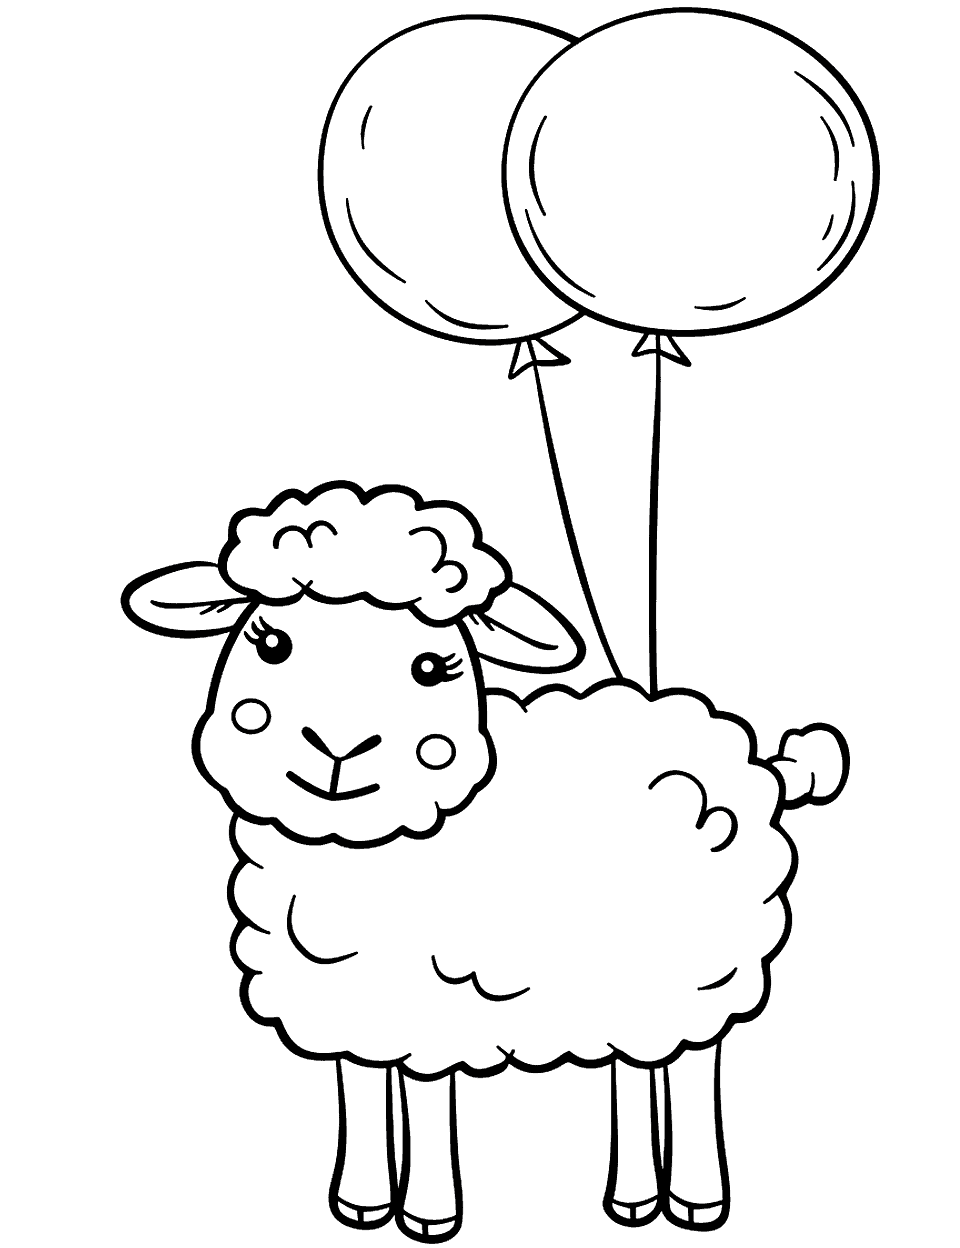 Sheep with Balloons Coloring Page - A cheerful sheep holding a bunch of balloons.